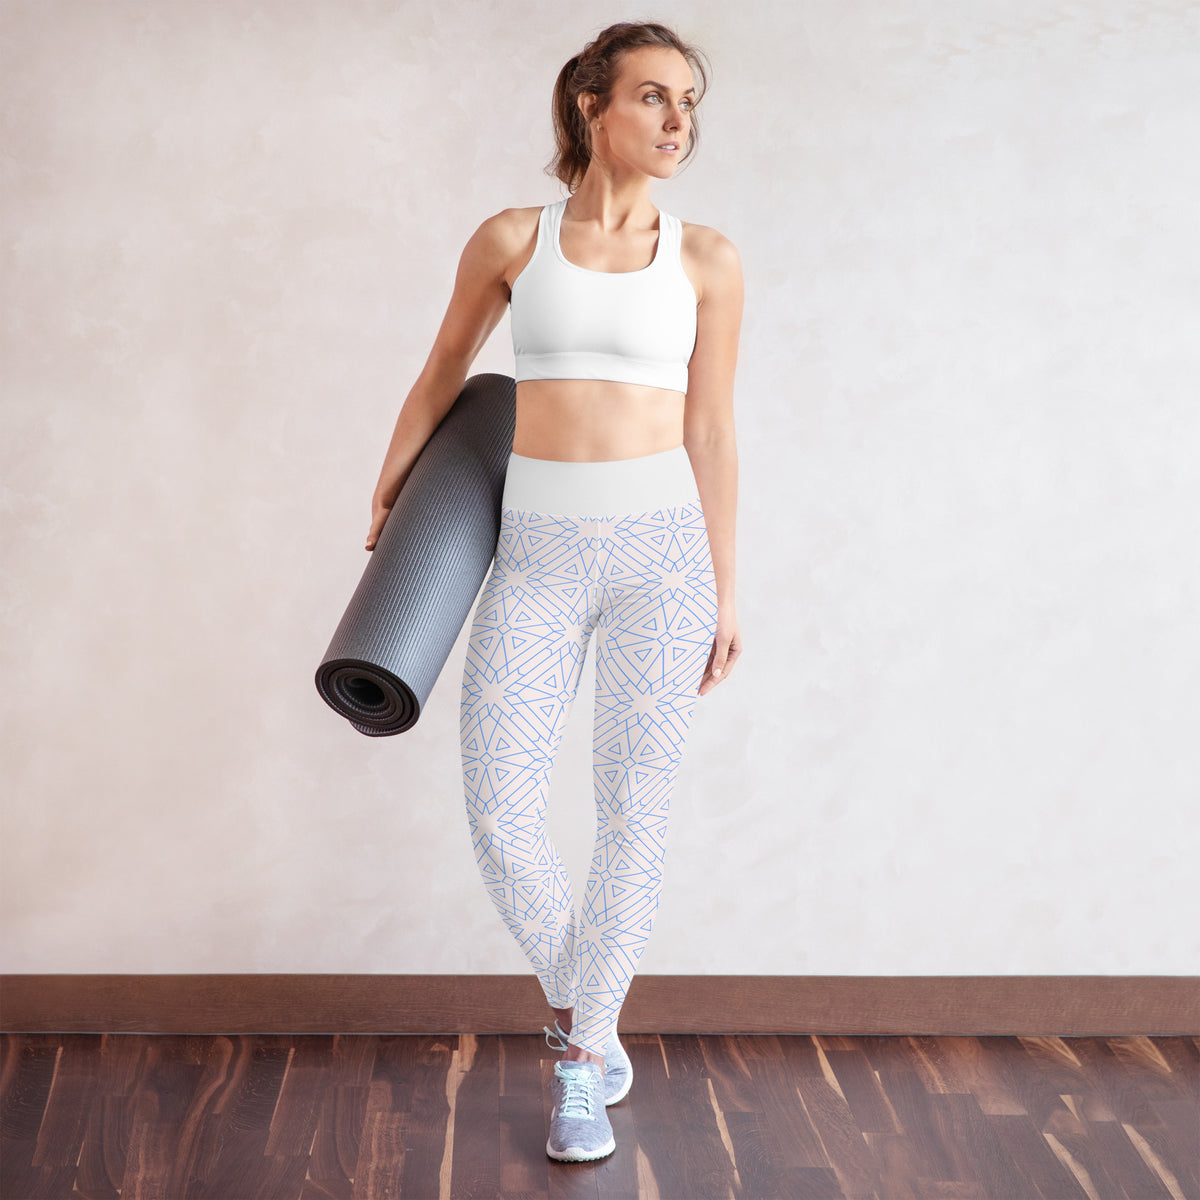 Ethereal Elegance Yoga Leggings in action, showing stretch and comfort.